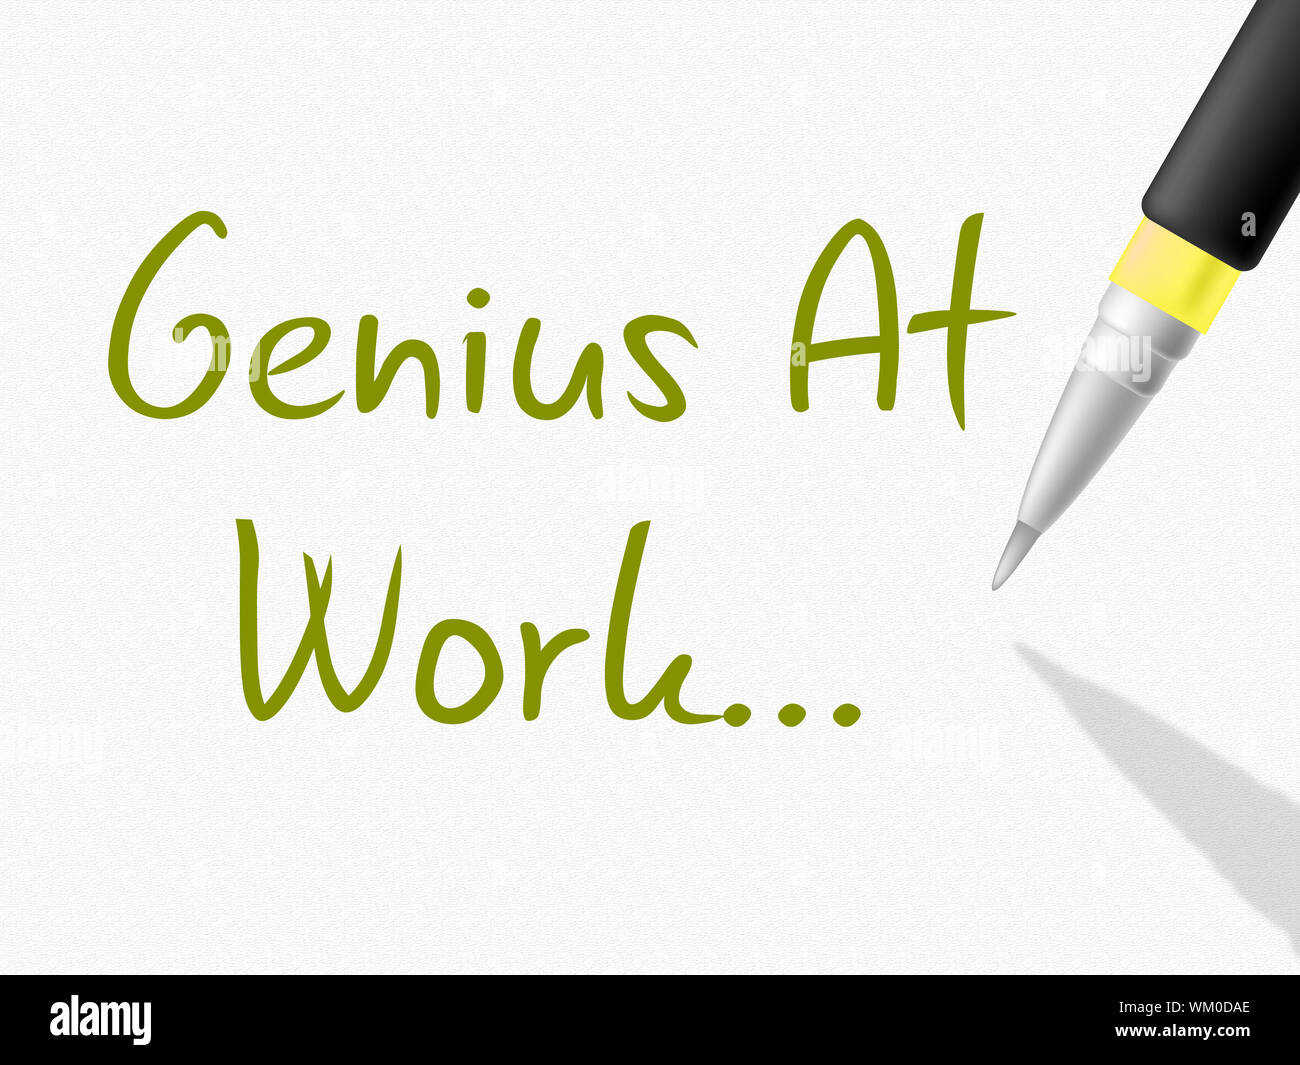 Genius At Work Meaning Intellectual Capacity And Comprehension Stock Photo